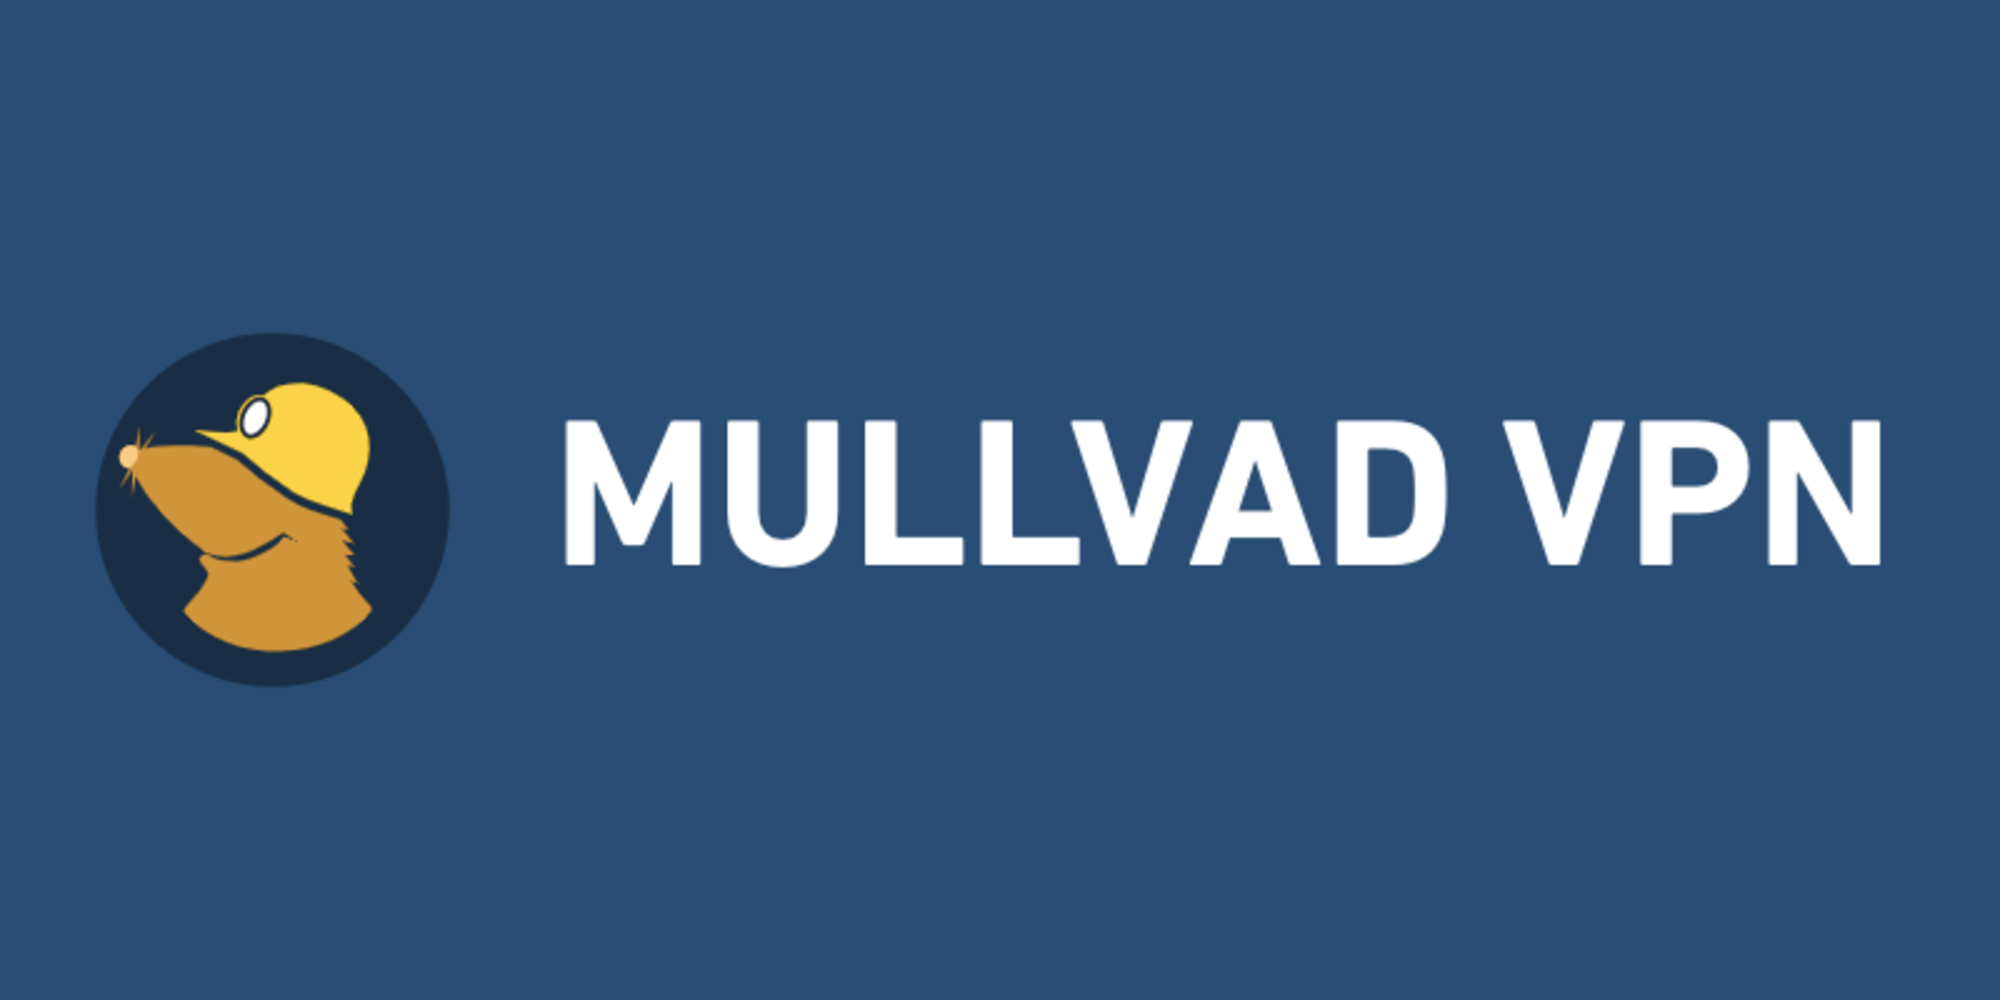 mullvad features